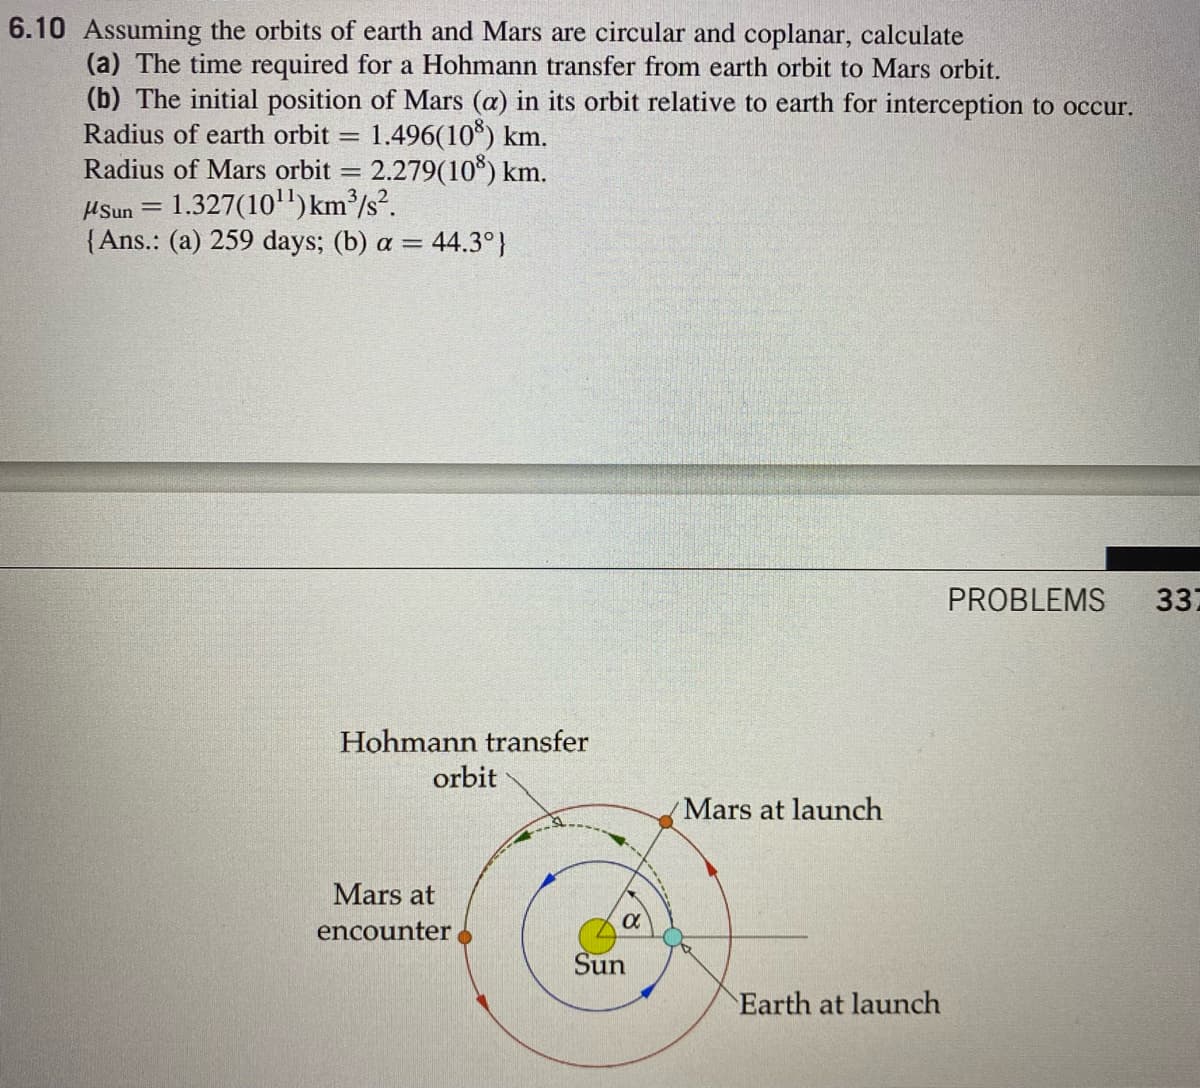 6.10 Assuming the orbits of earth and Mars are circular and coplanar, calculate
(a) The time required for a Hohmann transfer from earth orbit to Mars orbit.
(b) The initial position of Mars (a) in its orbit relative to earth for interception to occur.
Radius of earth orbit
1.496(10*) km.
%D
Radius of Mars orbit = 2.279(10*) km.
HSun = 1.327(10)km³/s?.
{Ans.: (a) 259 days; (b) a = 44.3°}
PROBLEMS
337
Hohmann transfer
orbit
Mars at launch
Mars at
encounter
Sun
Earth at launch
